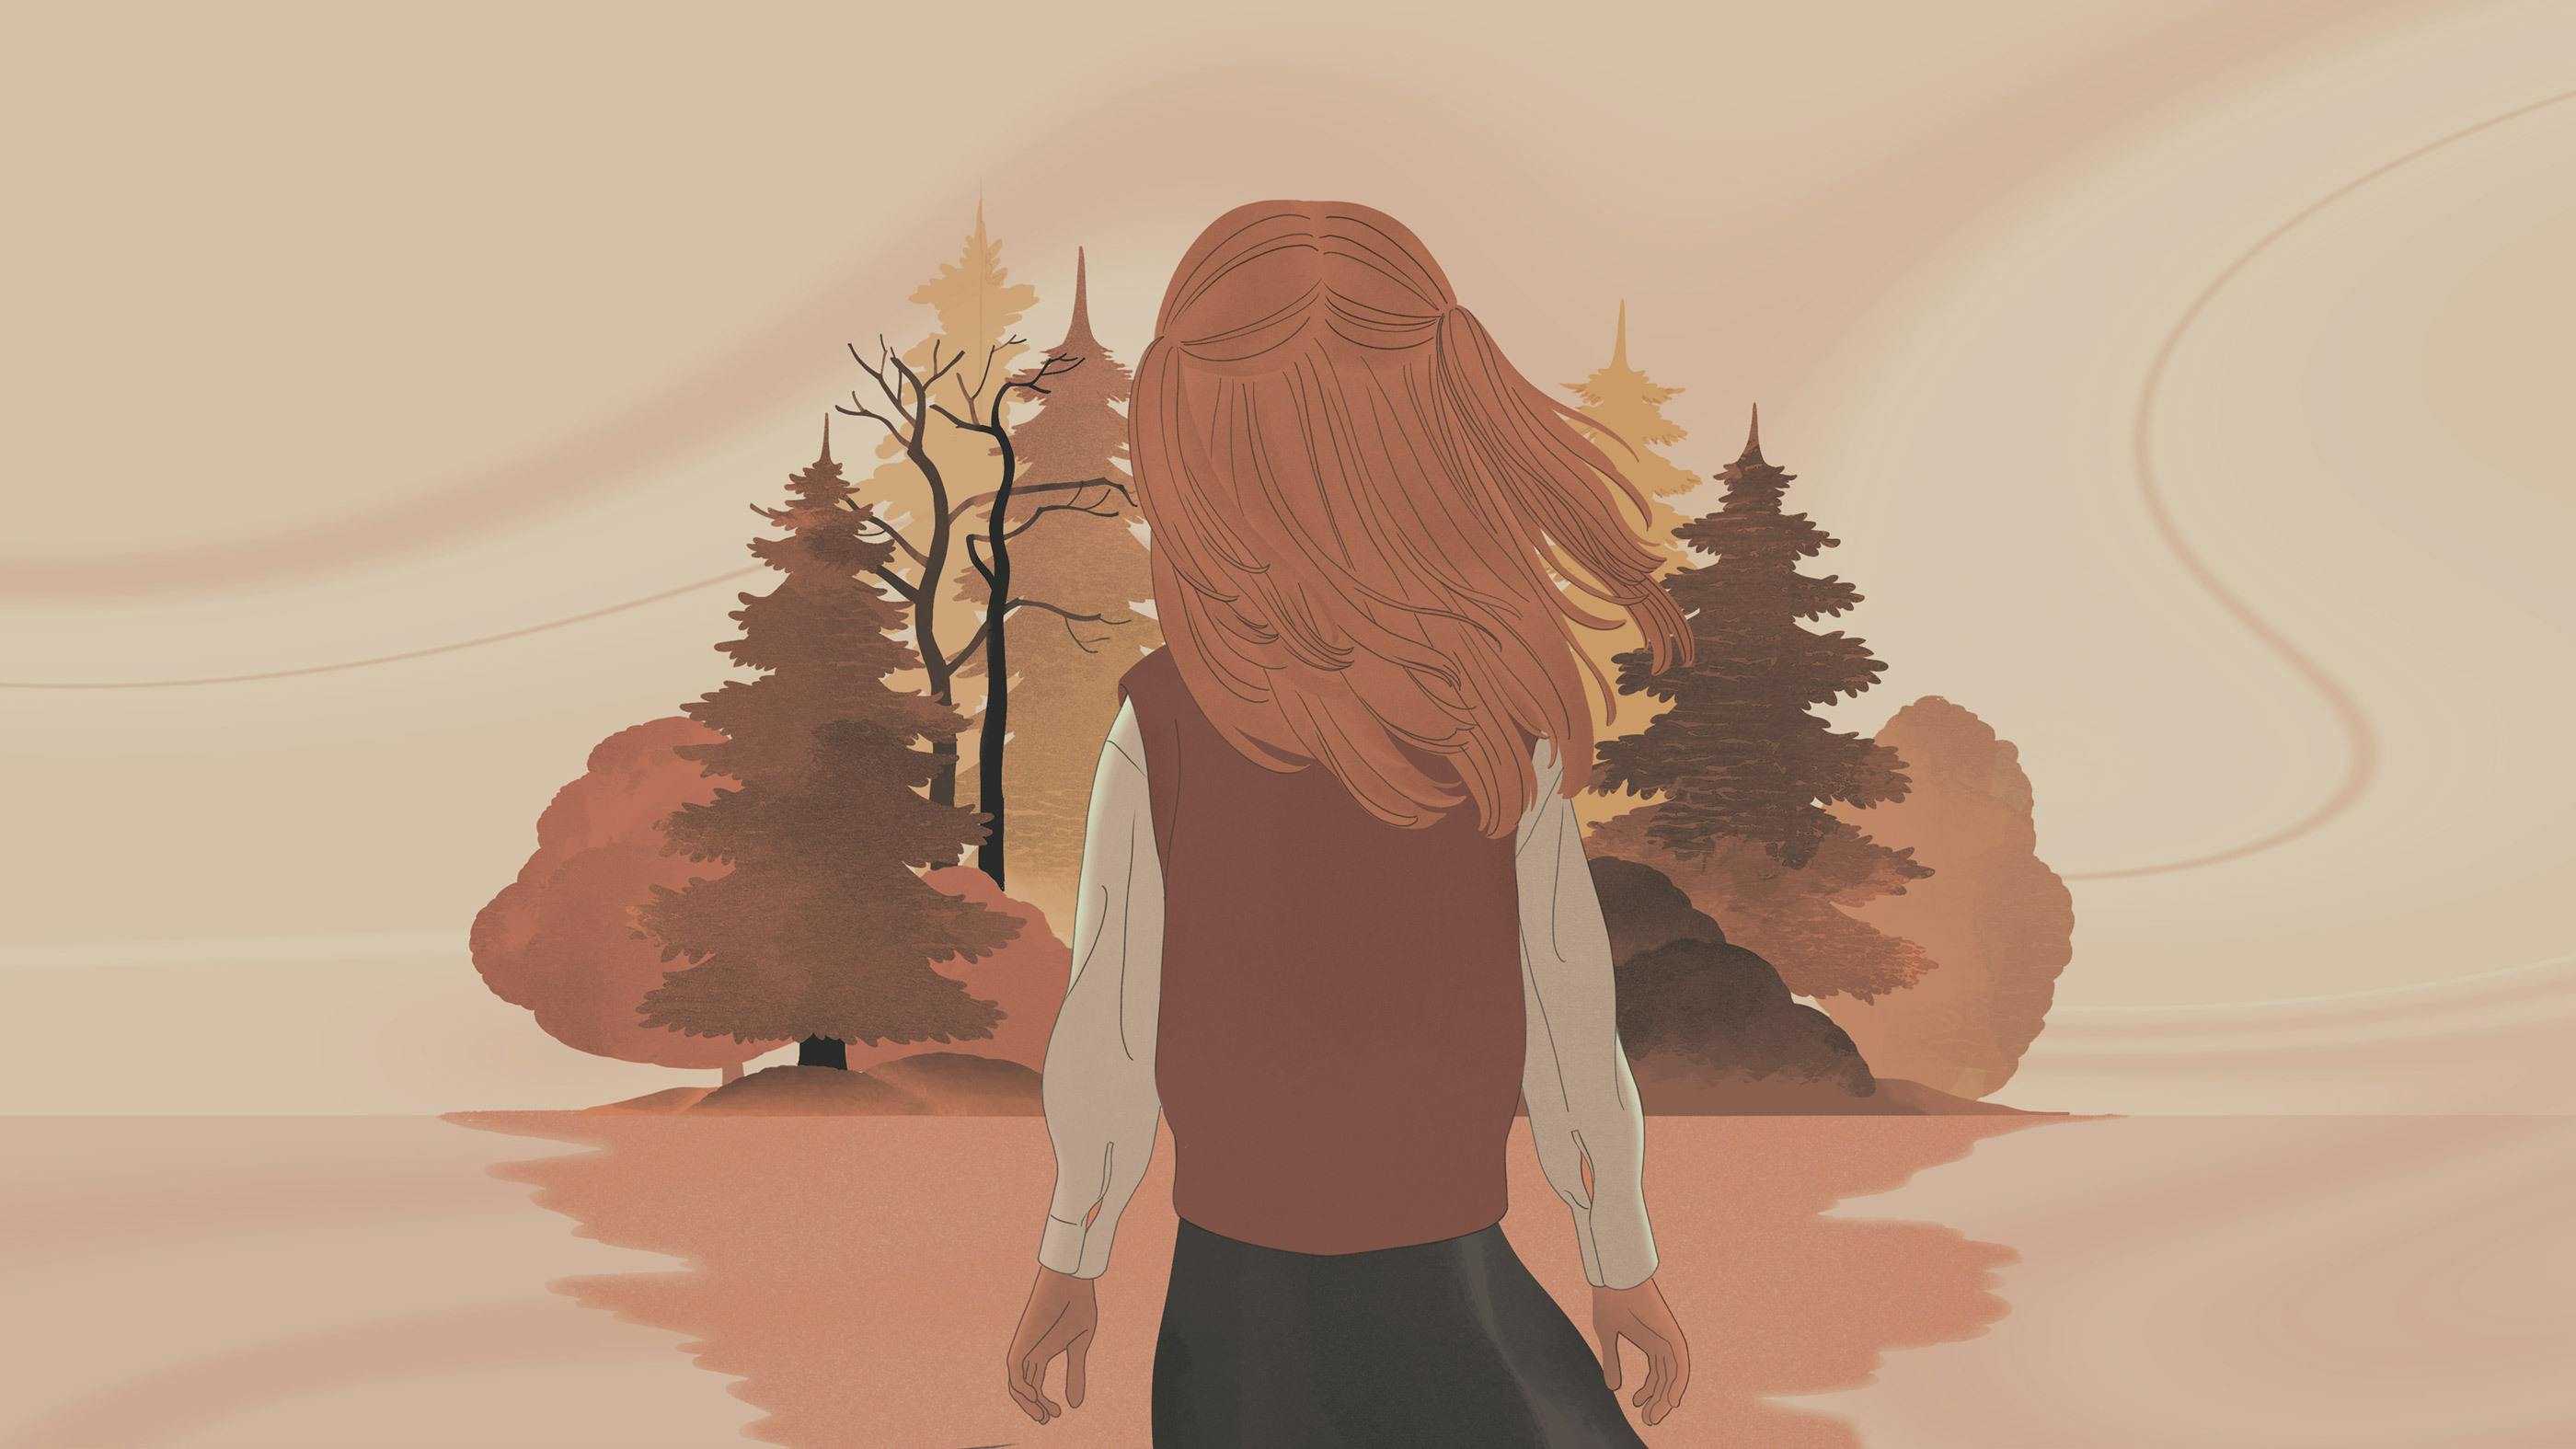 Girl walking towards a forest. illustration by Jun Cen of part 1, a bad feeling